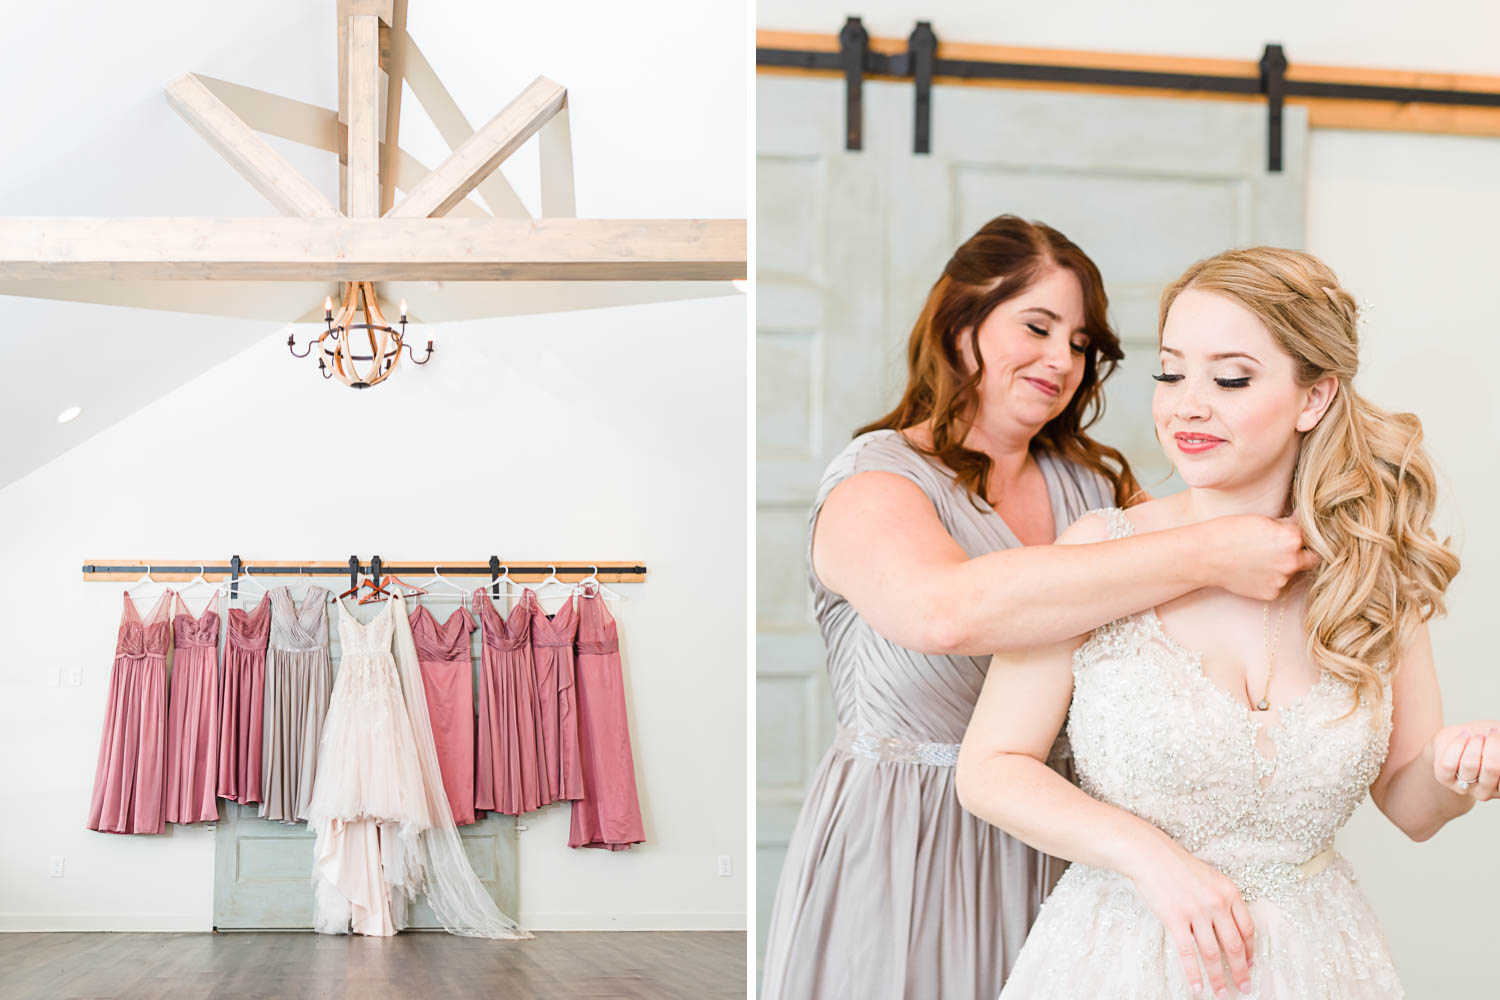 dusty rose colored bridesmaids dresses inside the cottage at The Venue Chattanooga. And Mother of bride helping button up brides dress and put on her necklace